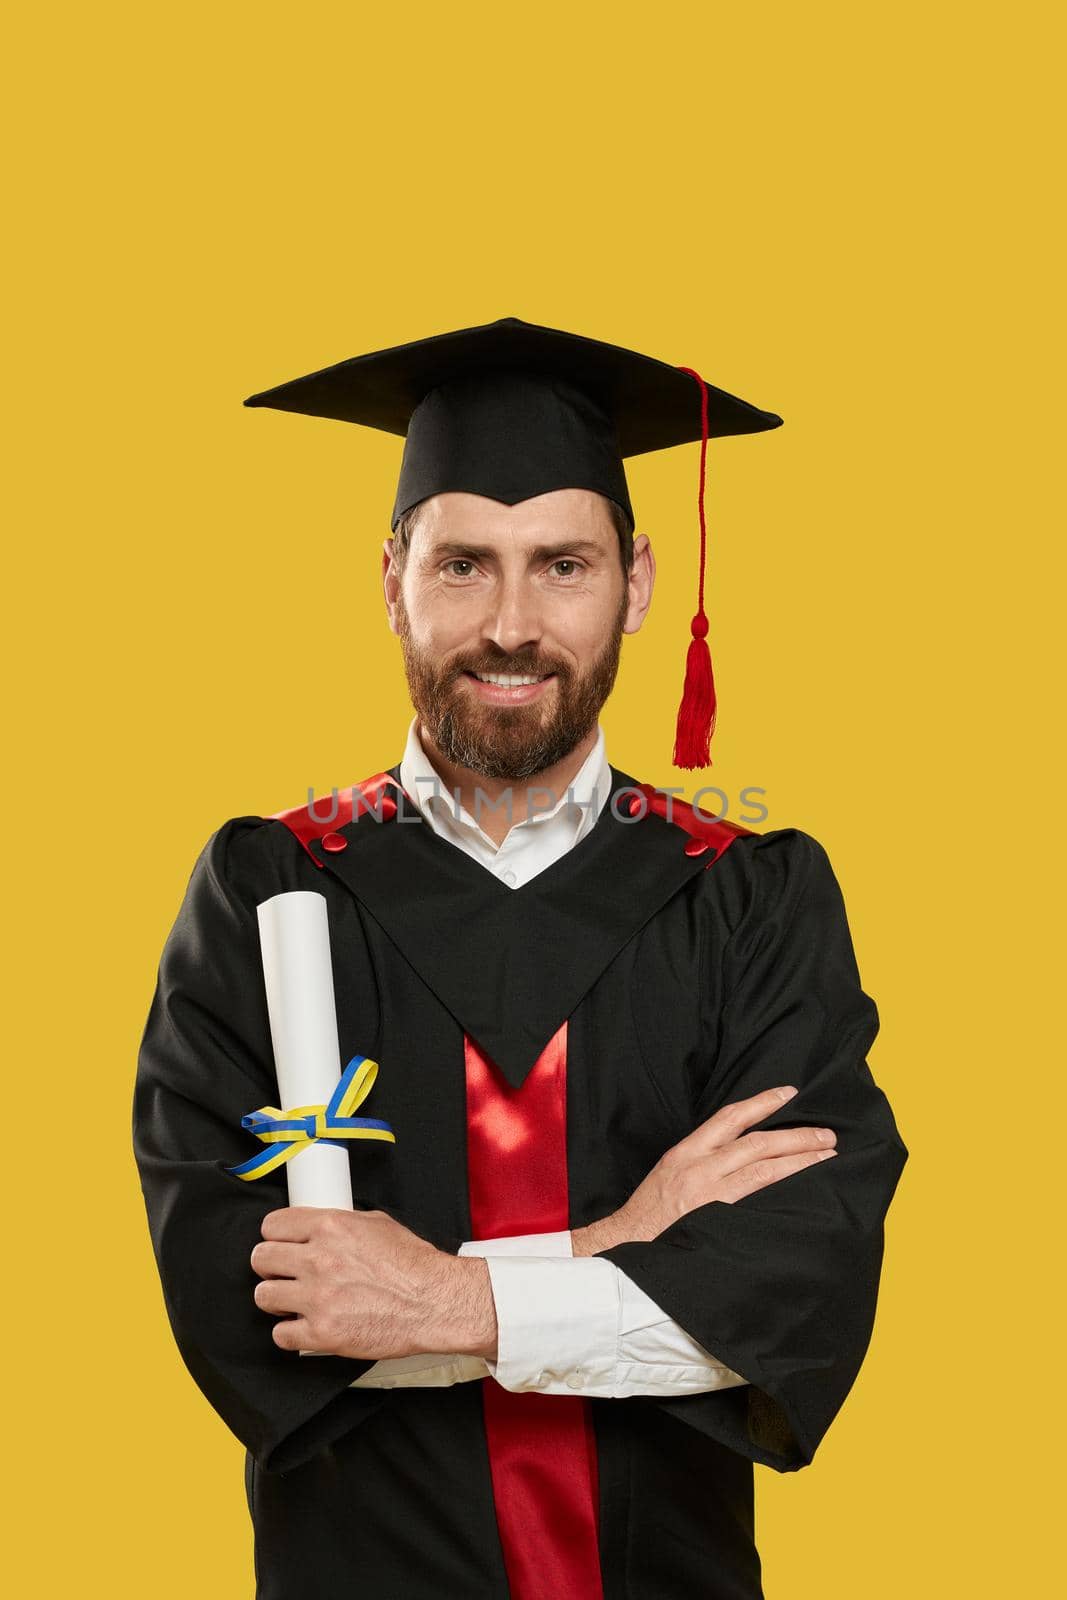 Man with beard graduating from university, college. by SerhiiBobyk